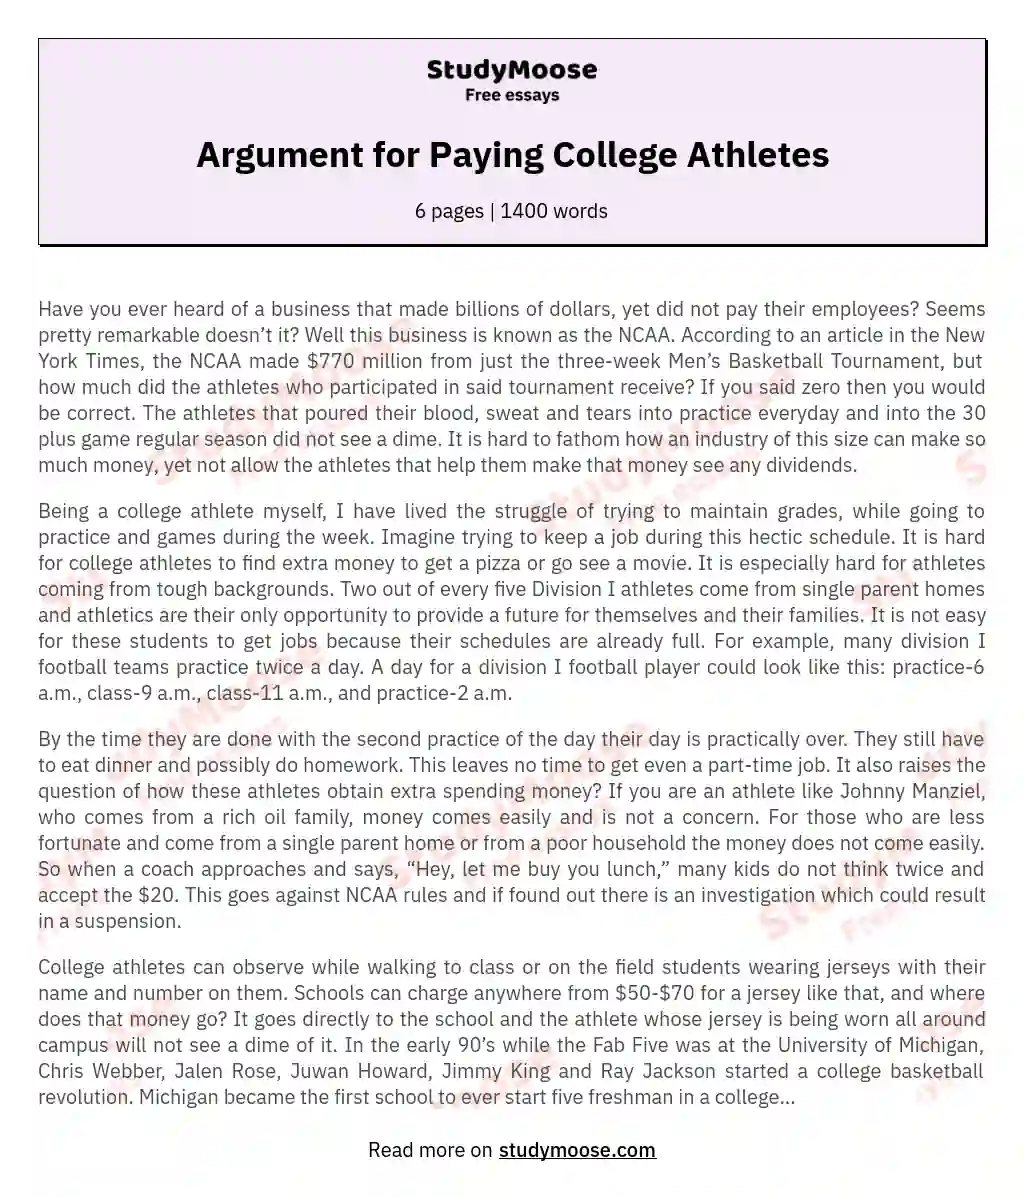 Argument for Paying College Athletes essay